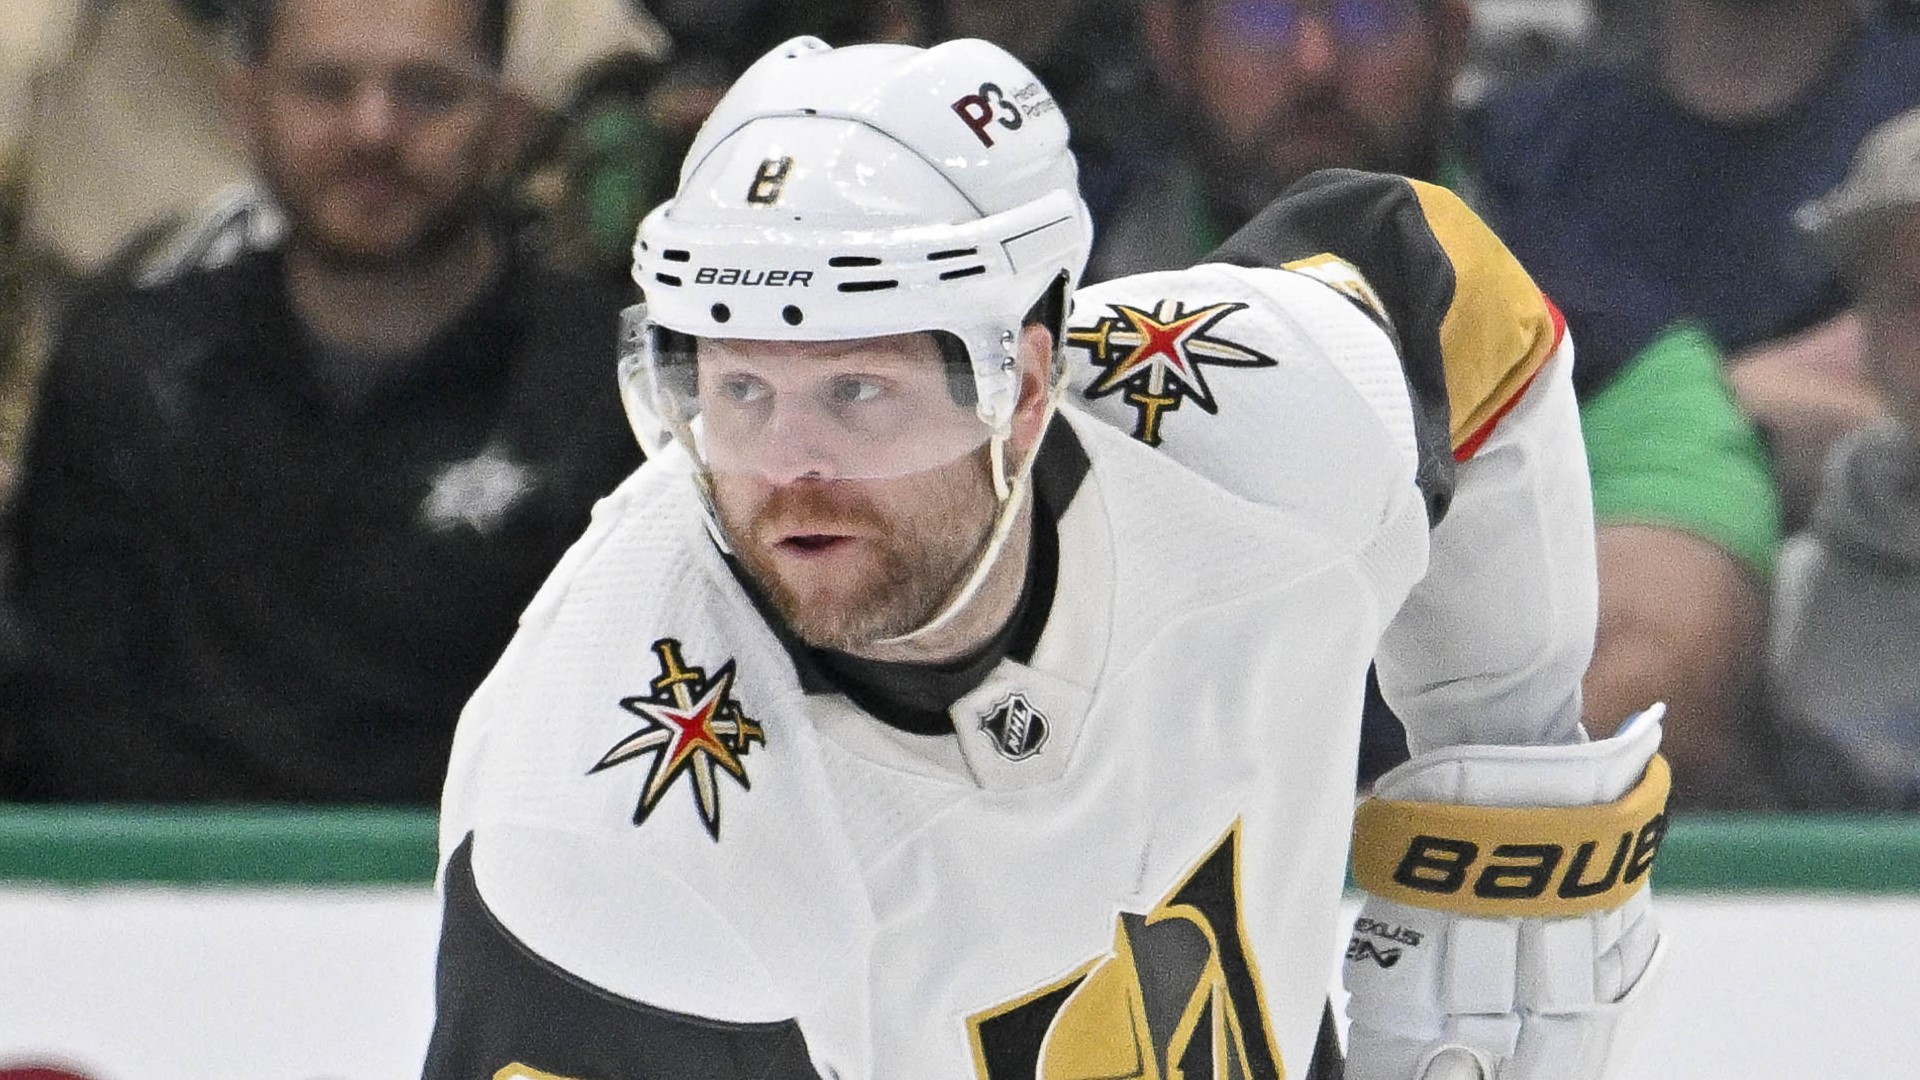 NHL Rumors: Ex-Bruin Phil Kessel ‘On Track’ To Sign With Contender